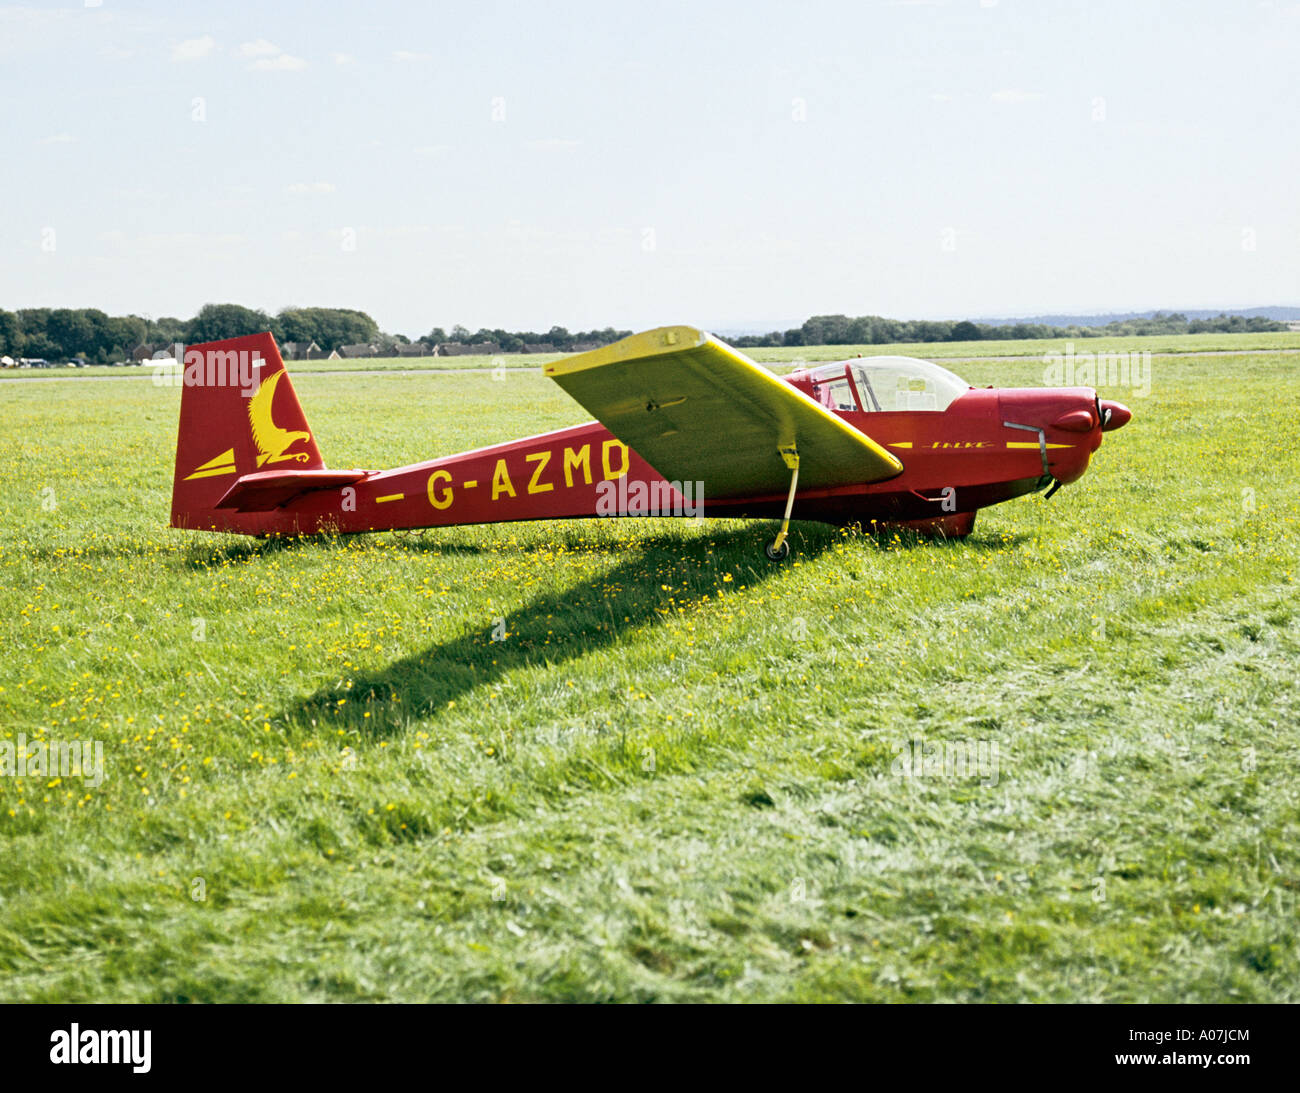 Military Glider Stock Photos & Military Glider Stock Images - Alamy